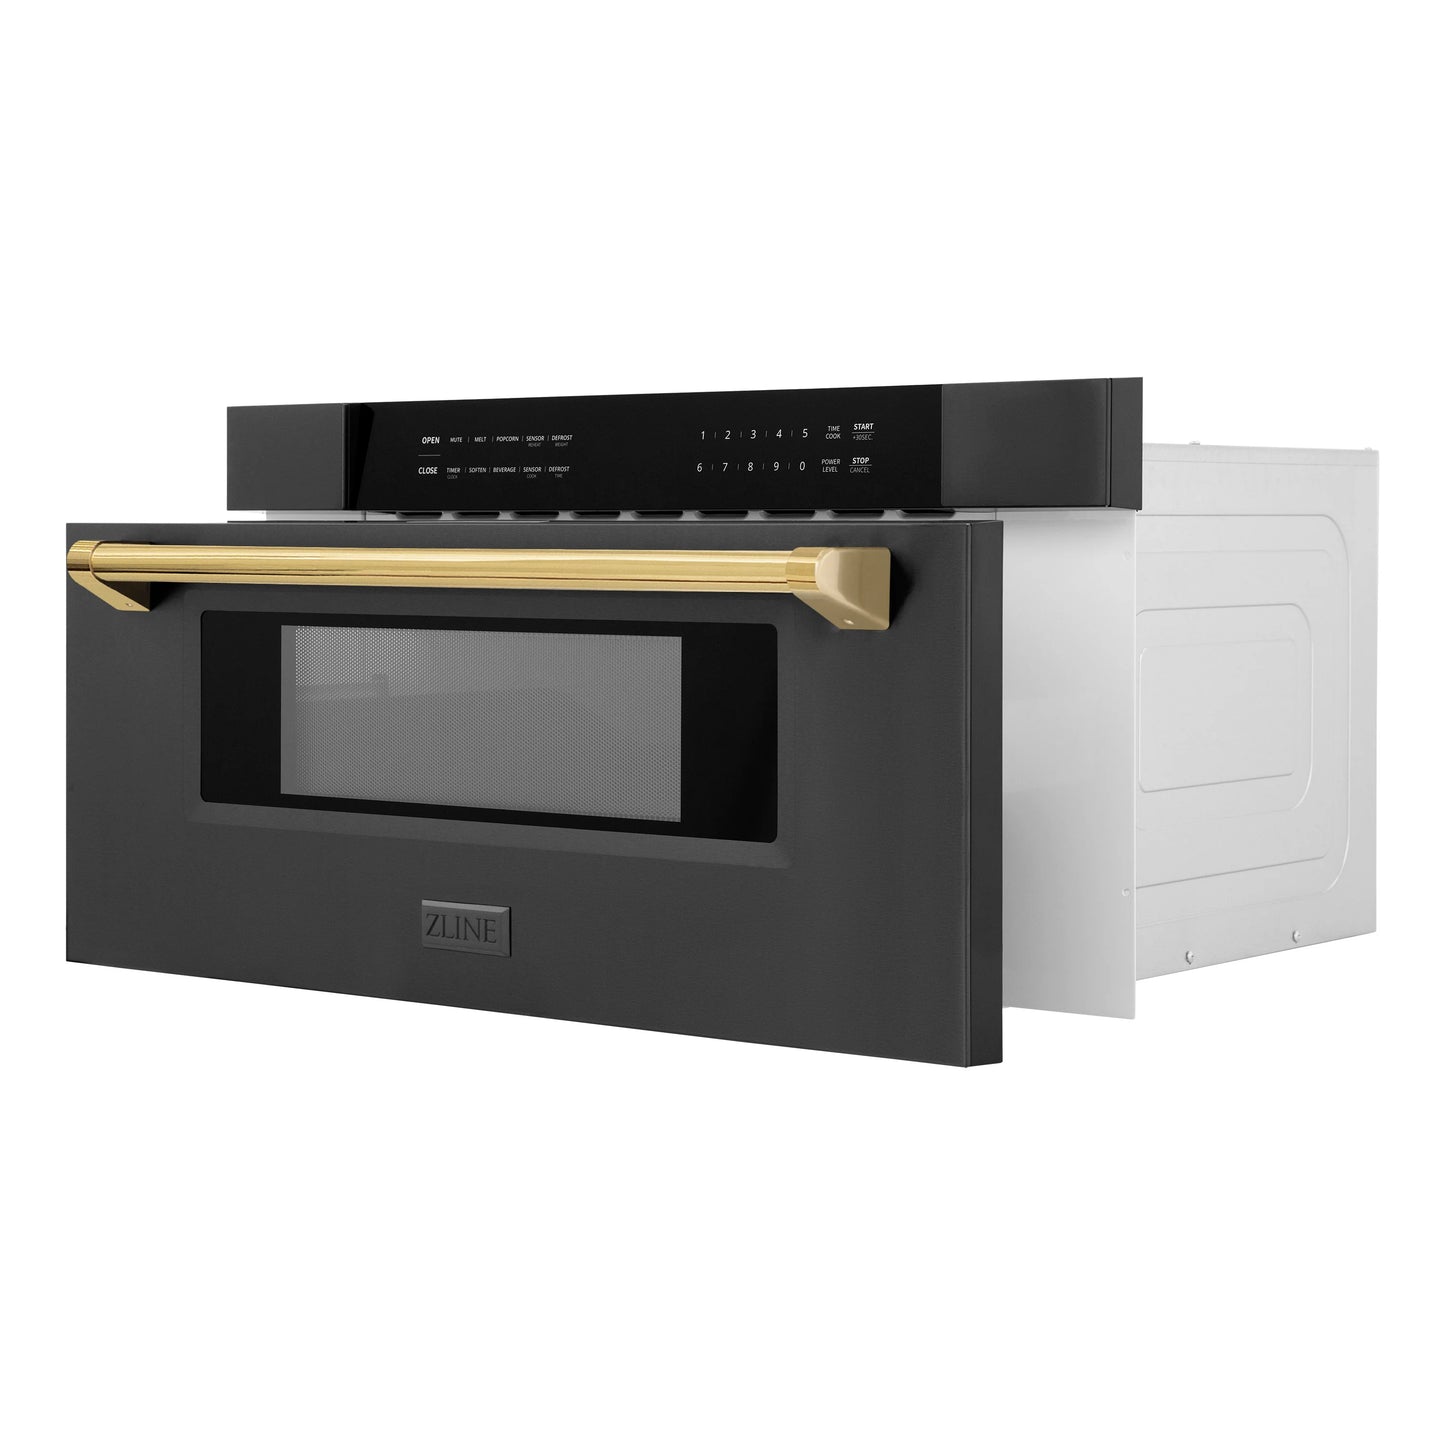 ZLINE Autograph Edition 30 in. 1.2 cu. ft. Built-in Microwave Drawer in Black Stainless Steel with Polished Gold Accents (MWDZ-30-BS-G)